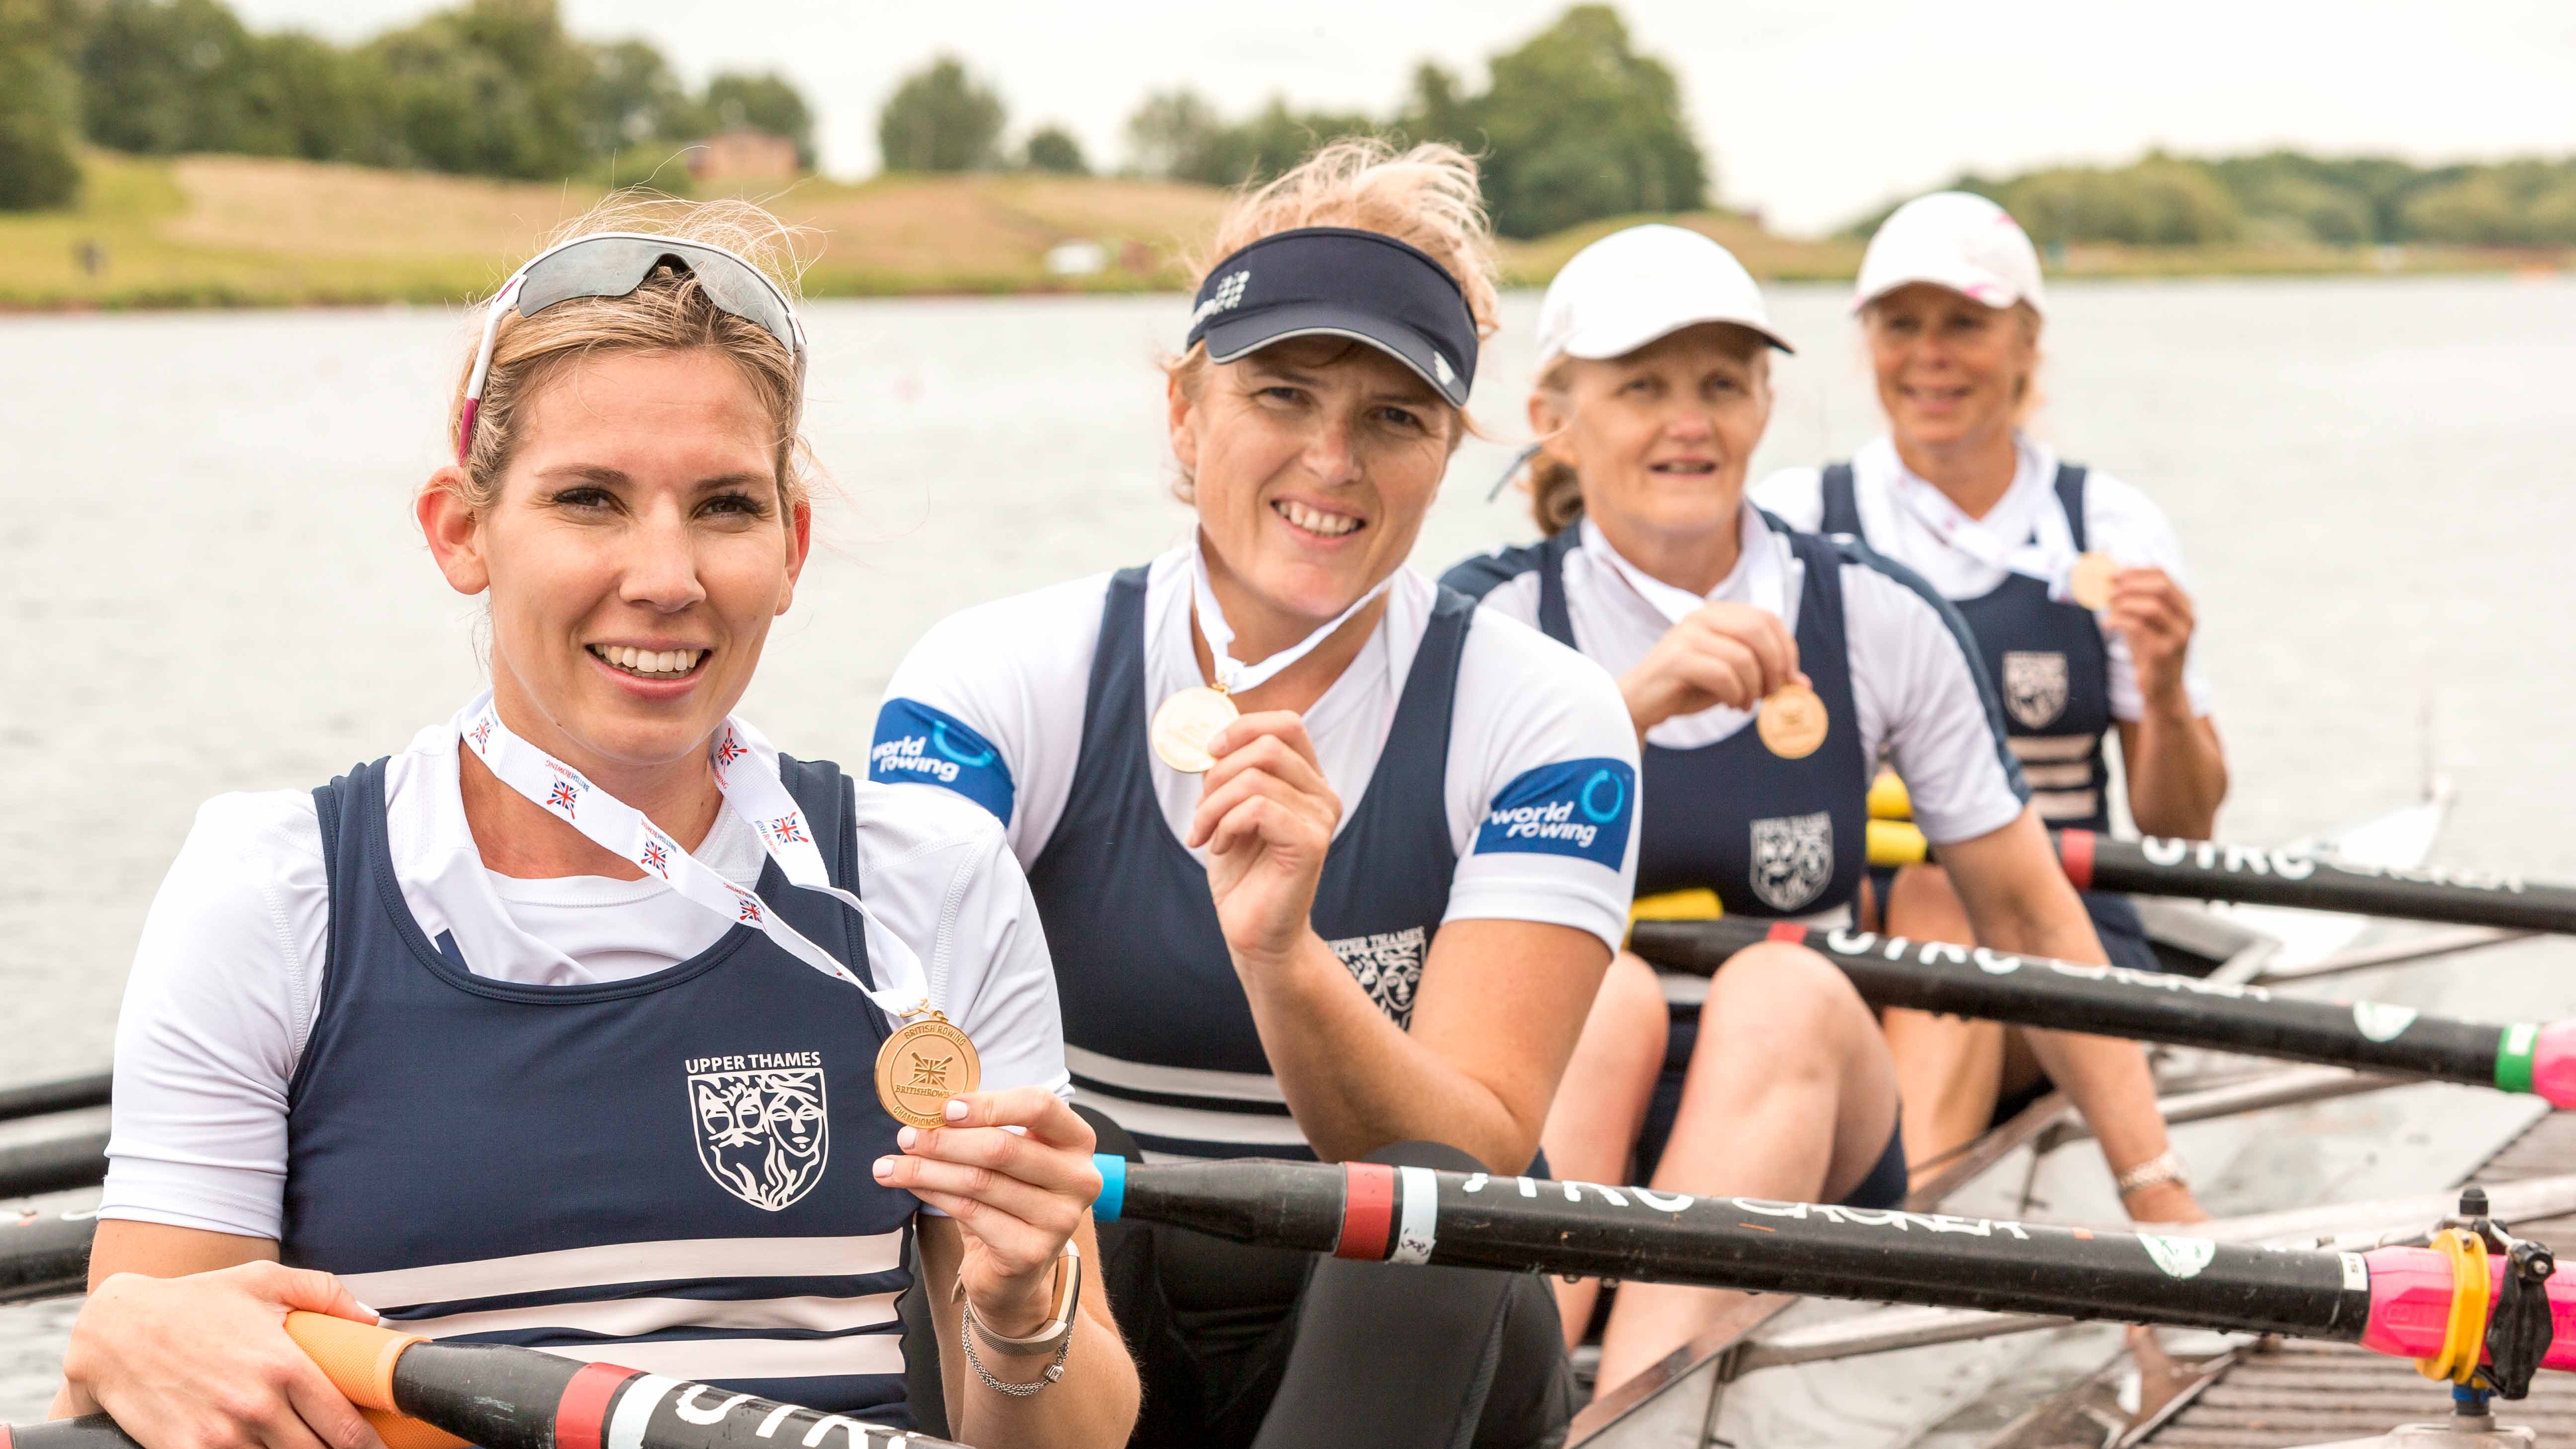 Exciting racing on show at the British Rowing Masters Championships as